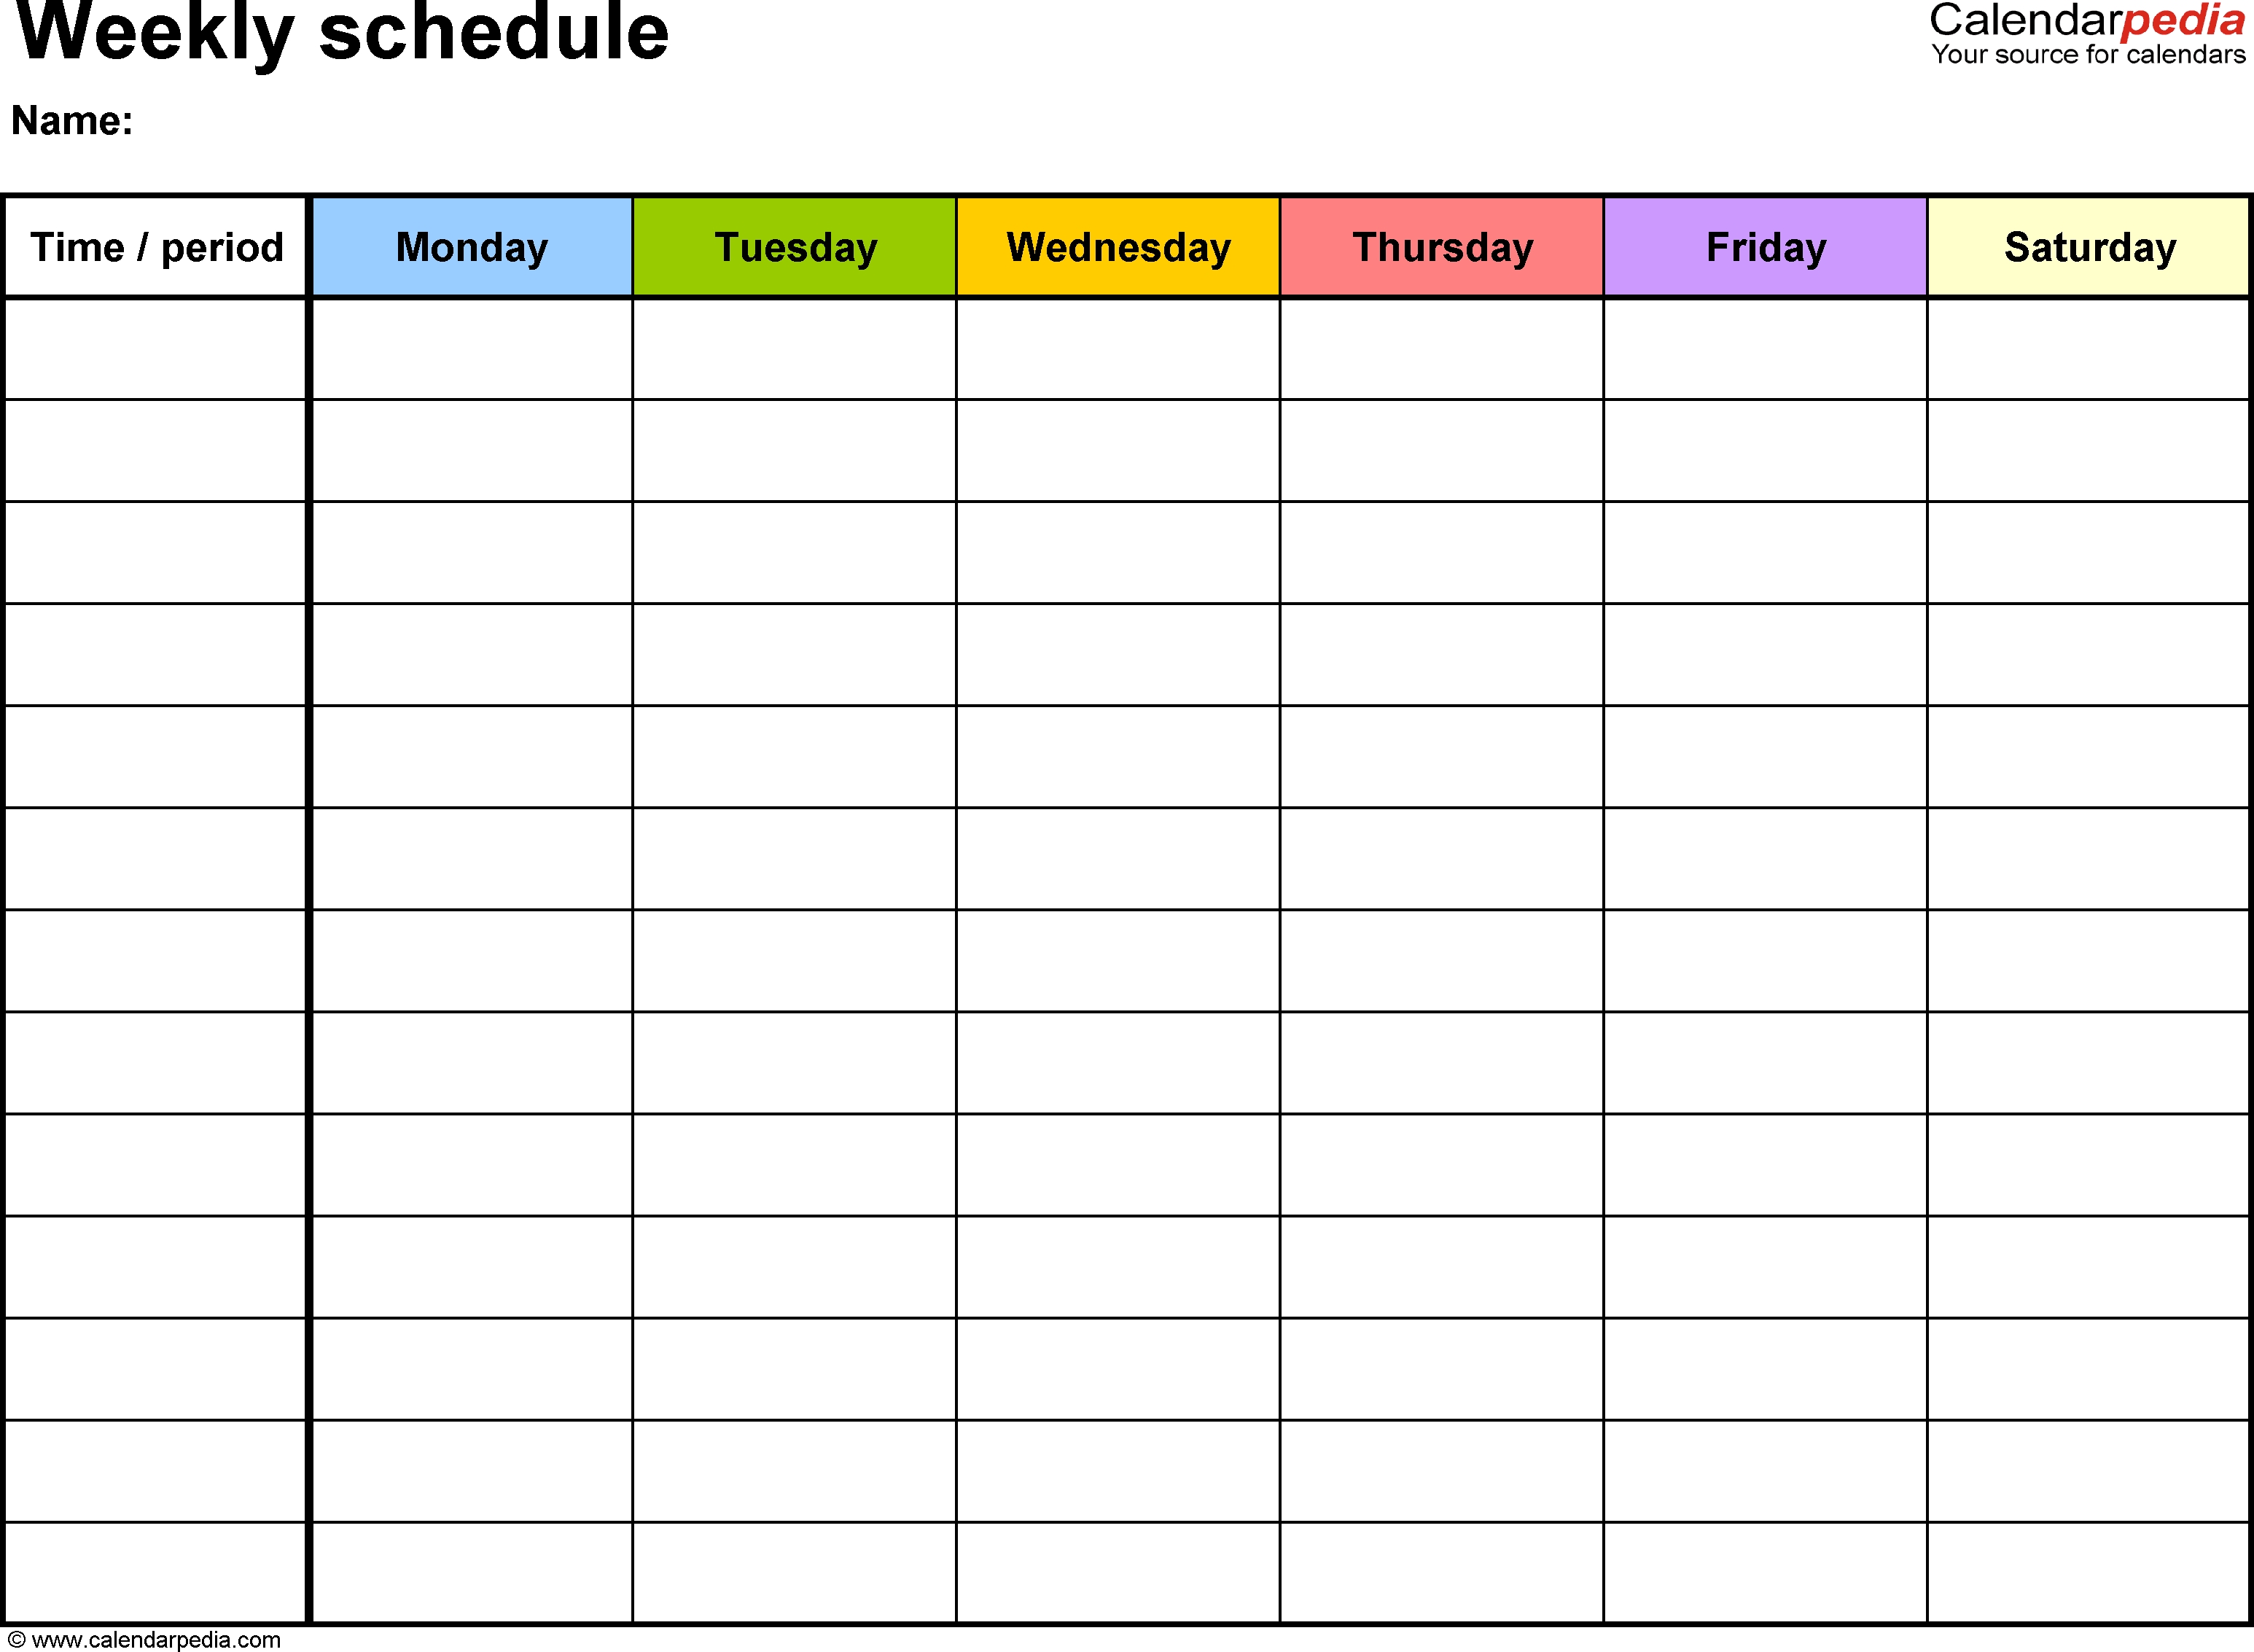 Free Weekly Schedule Templates For Word - 18 Templates 5 Day Calendar Template Word